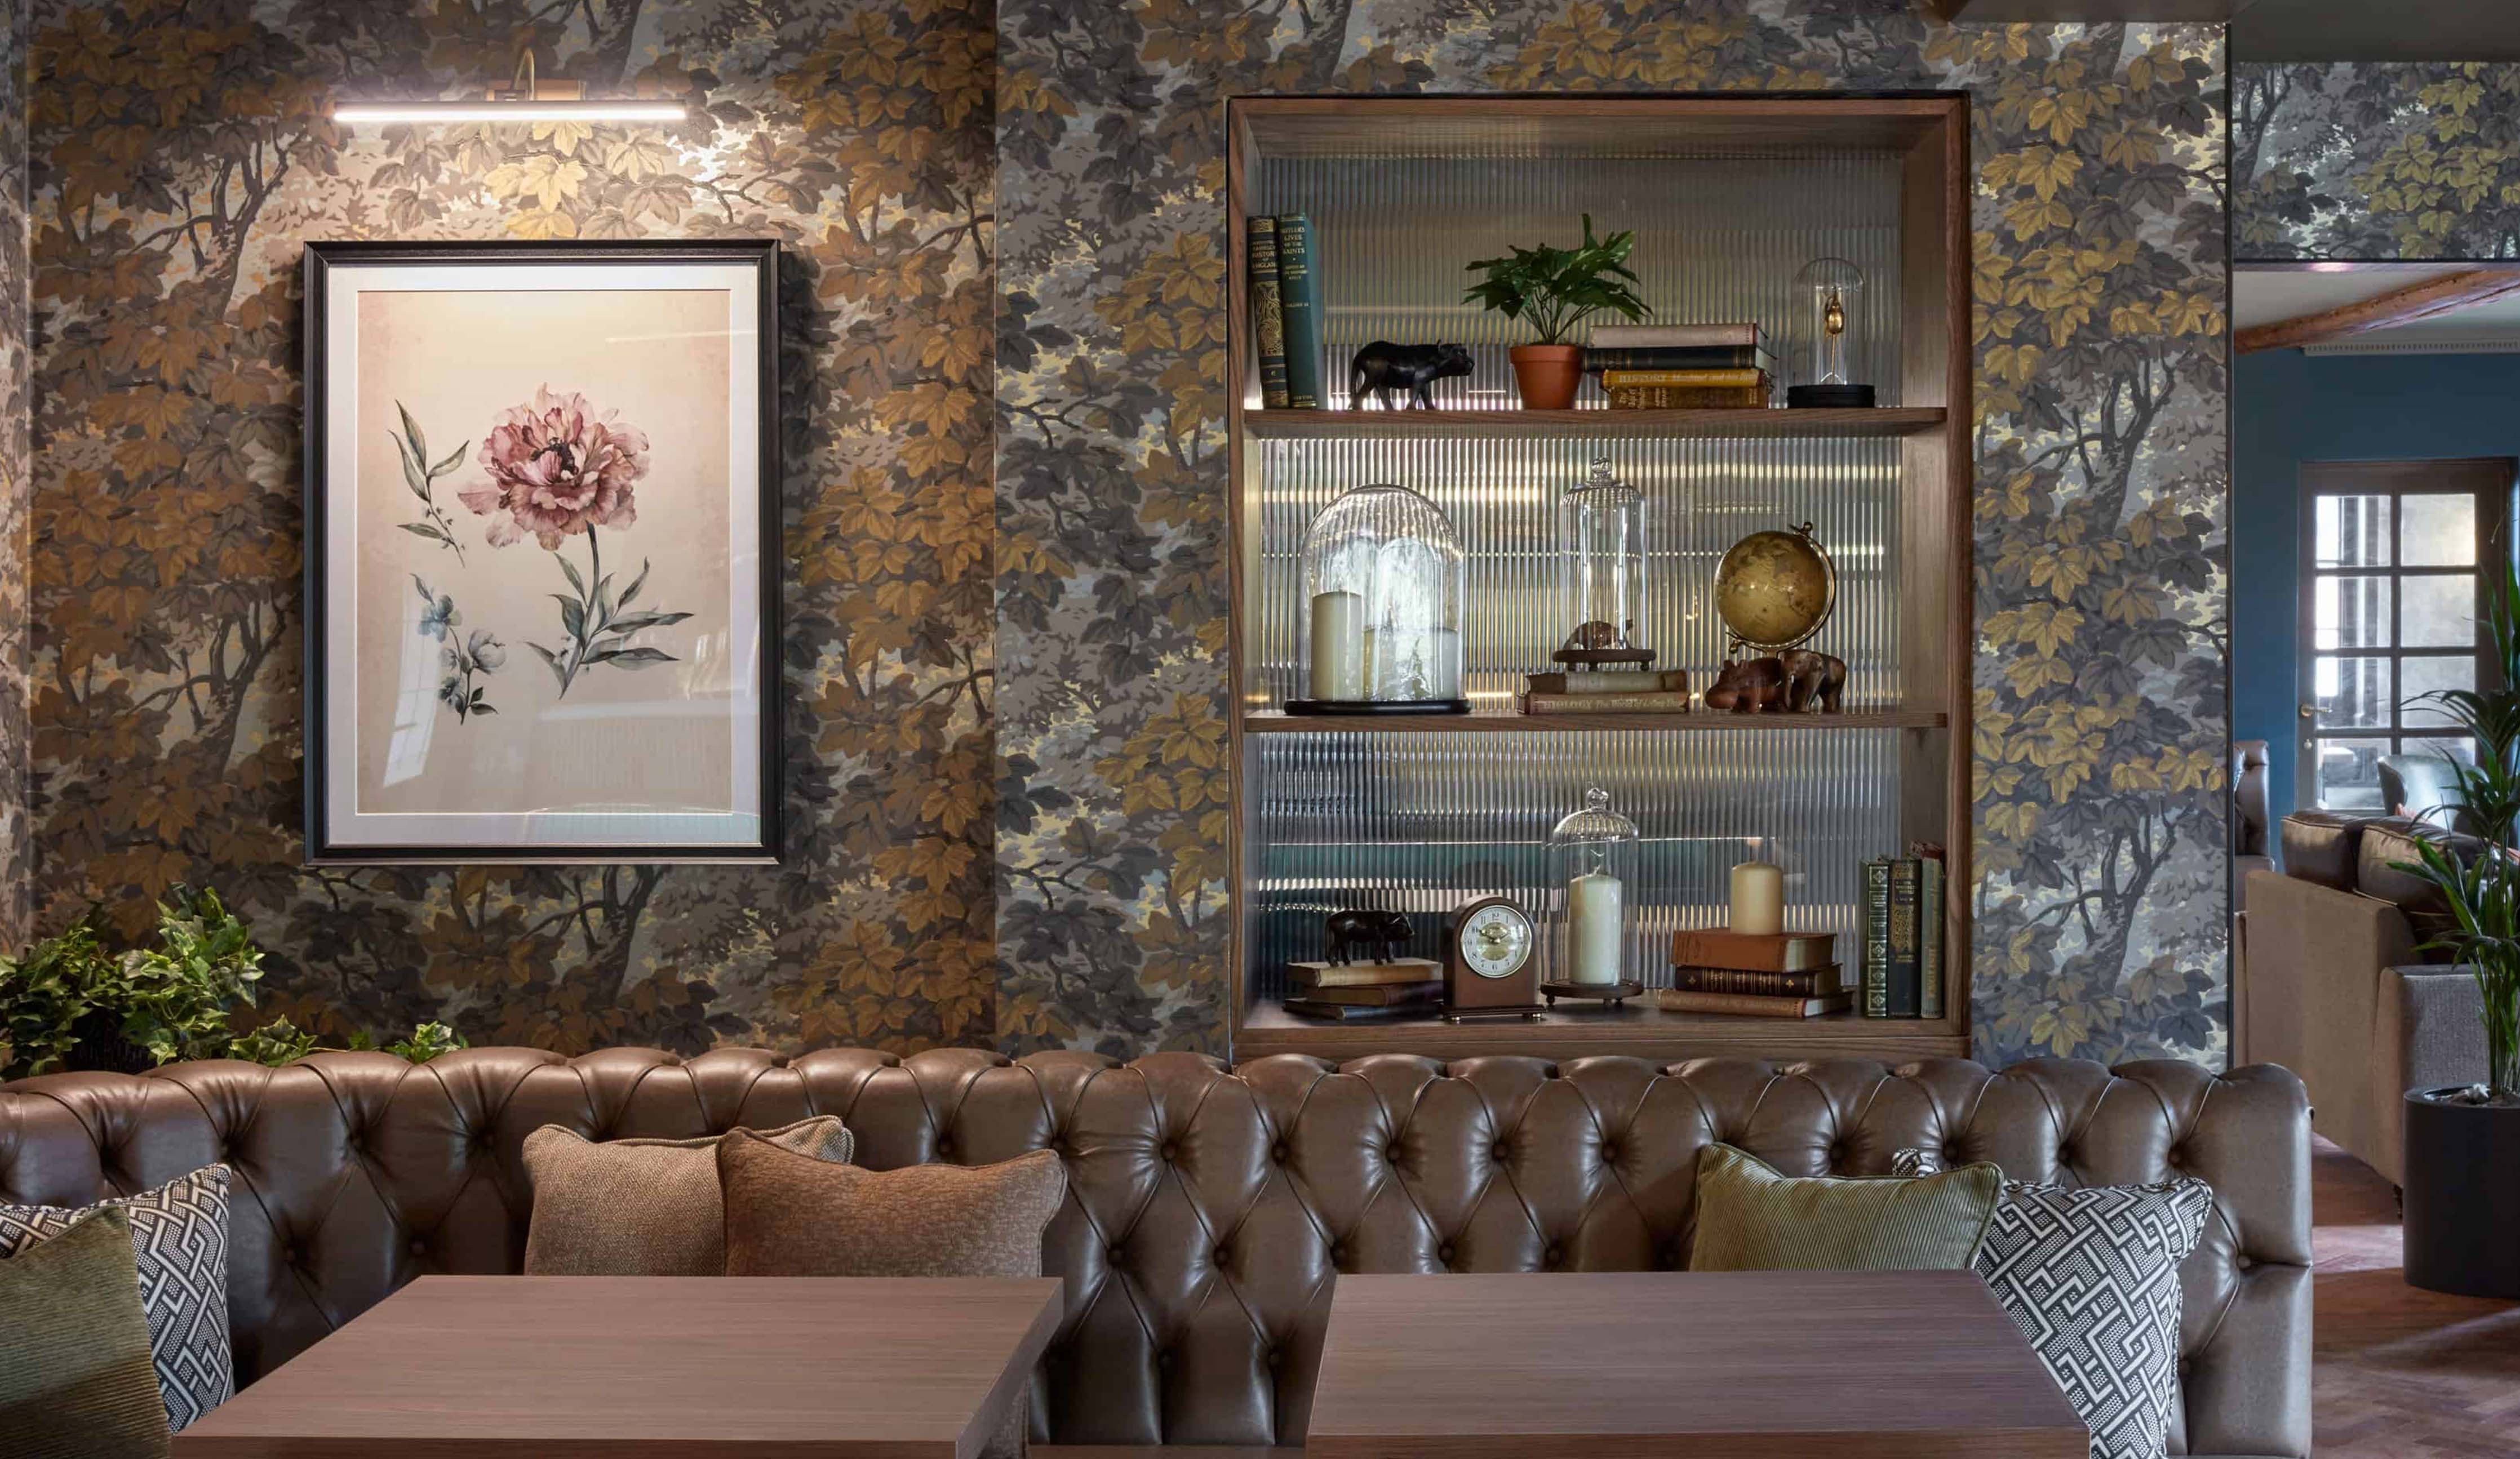 The George Hotel - Interior design by Faber